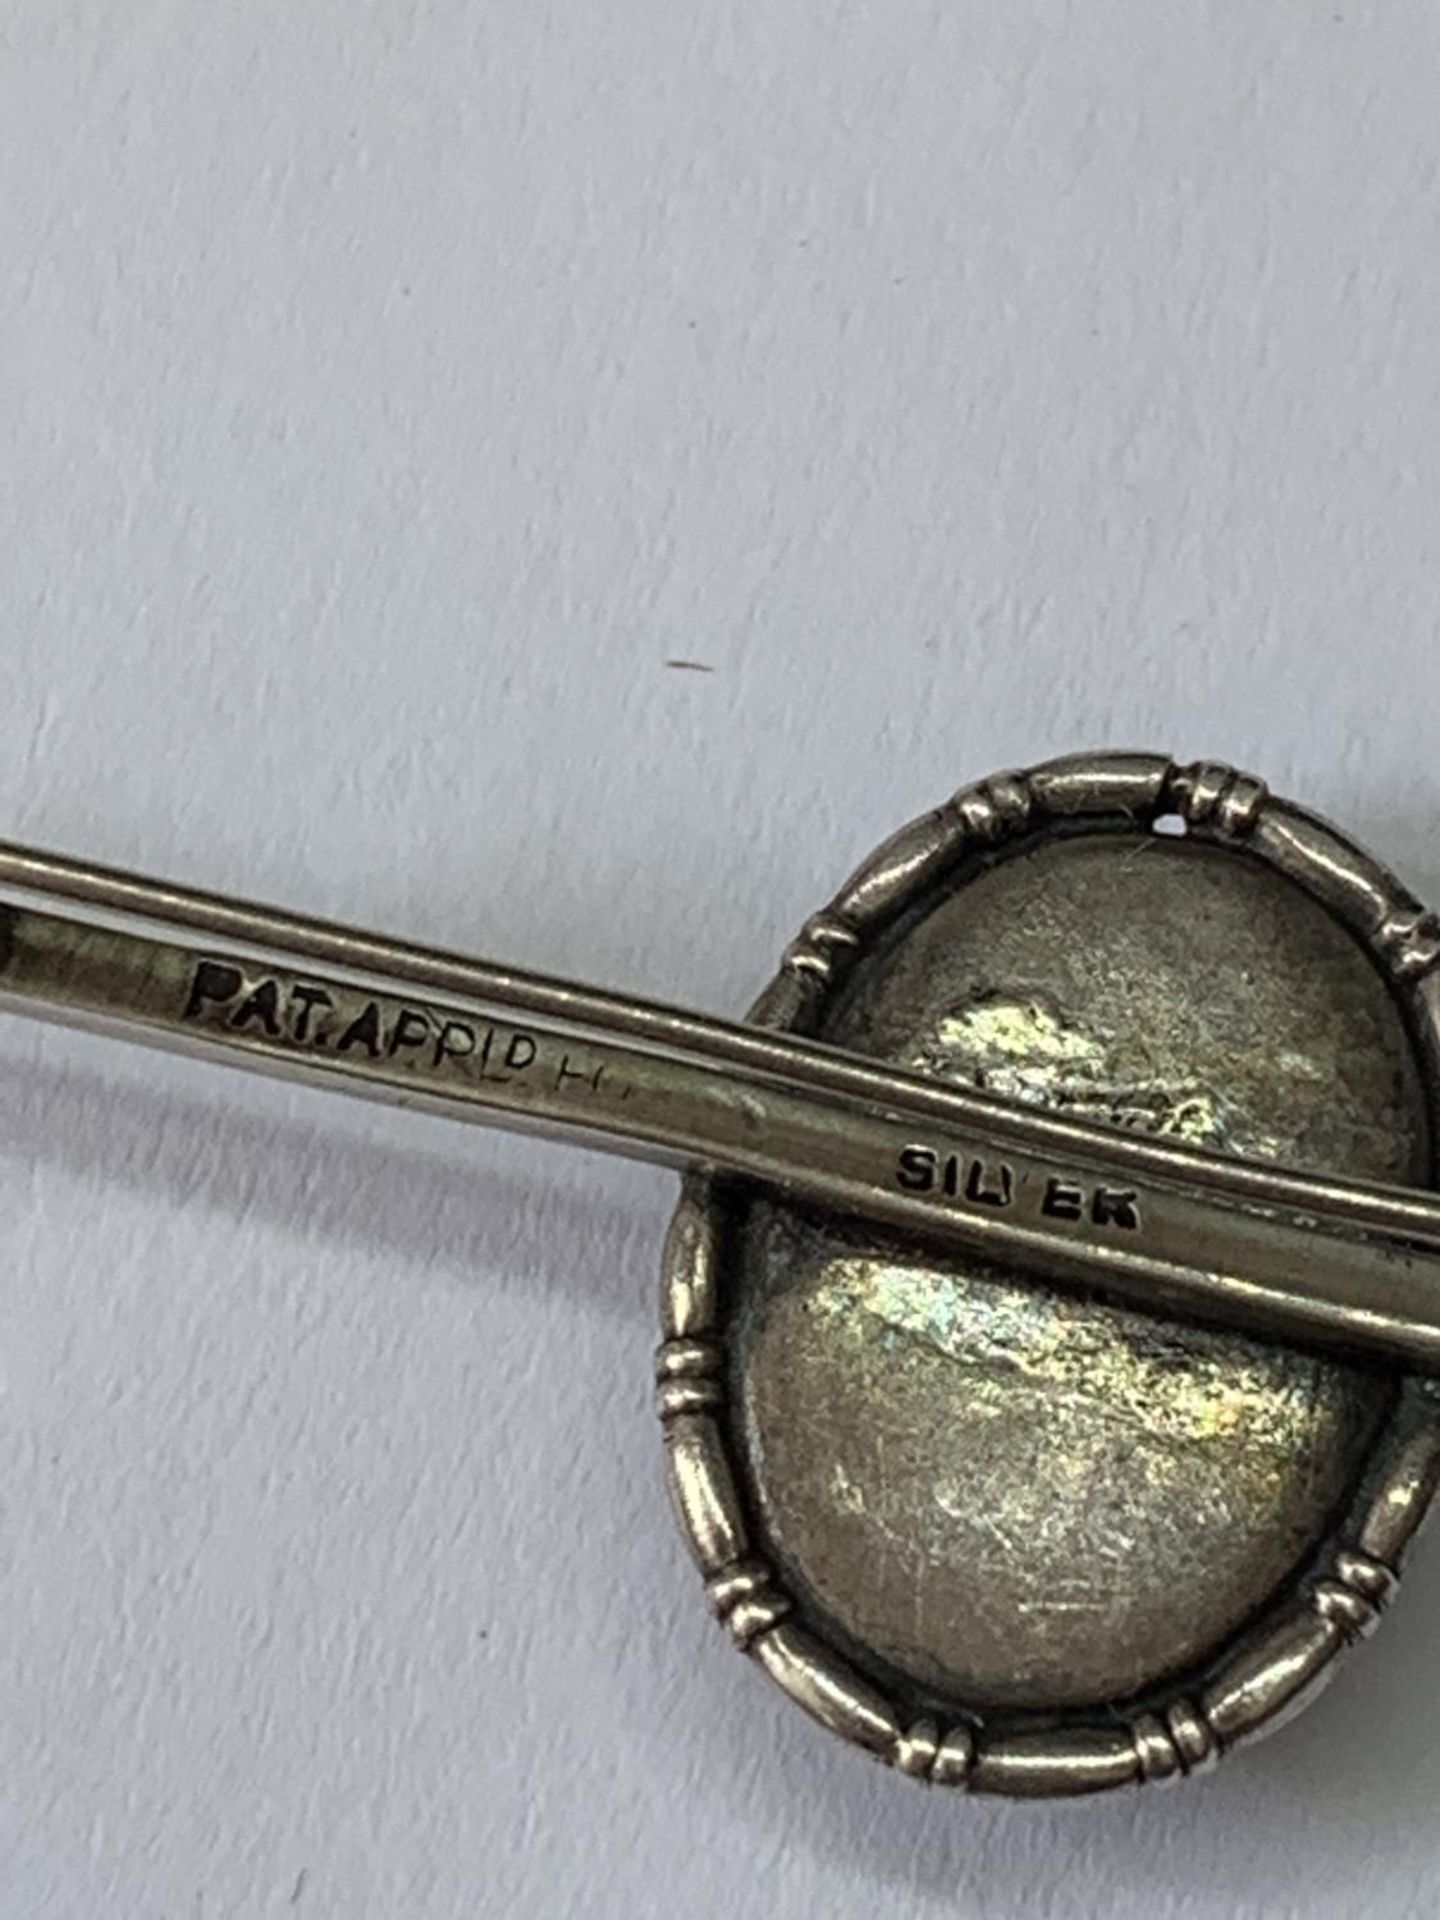 A MARKED SILVER PIN BROOCH WITH LADY DECORATION - Image 3 of 3